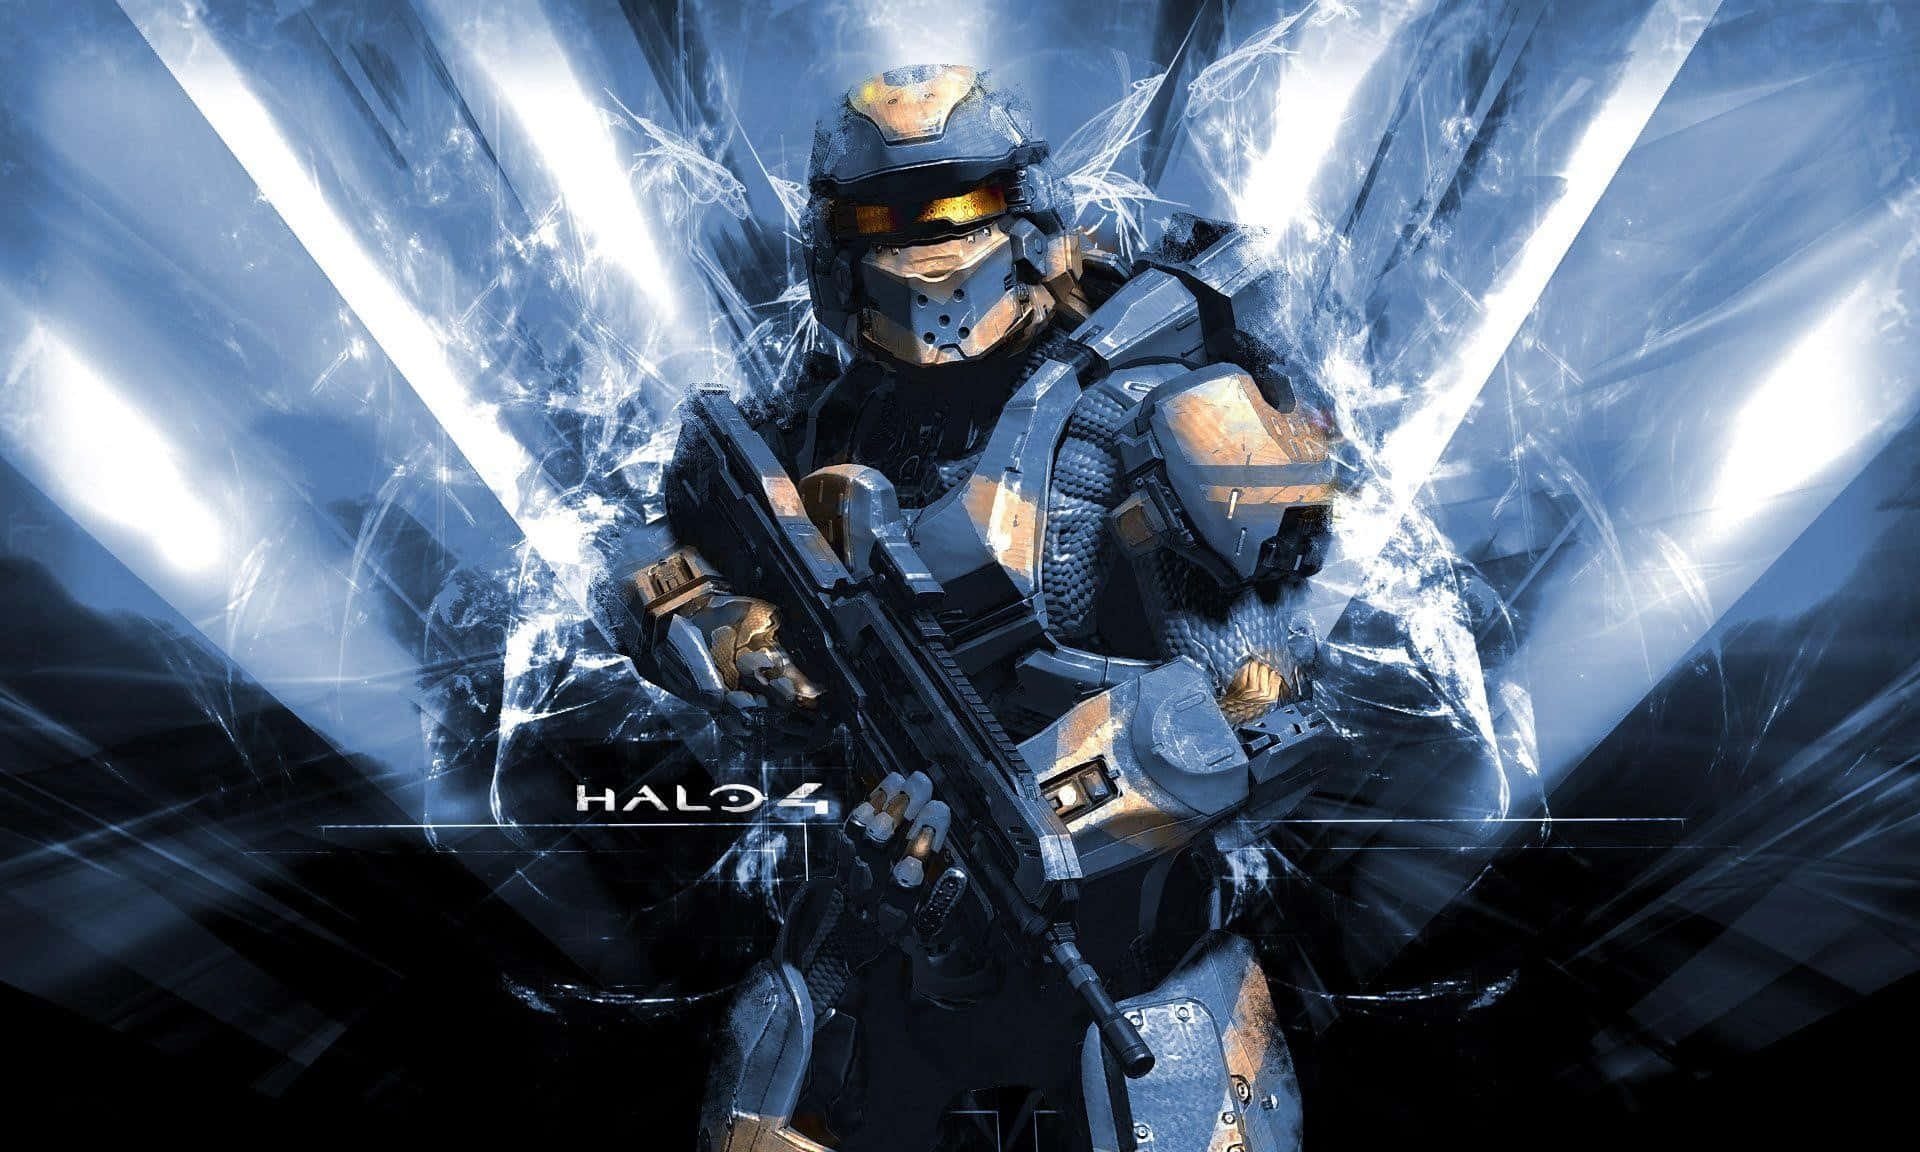 Halo Red Team ready for action in an immersive sci-fi scene Wallpaper